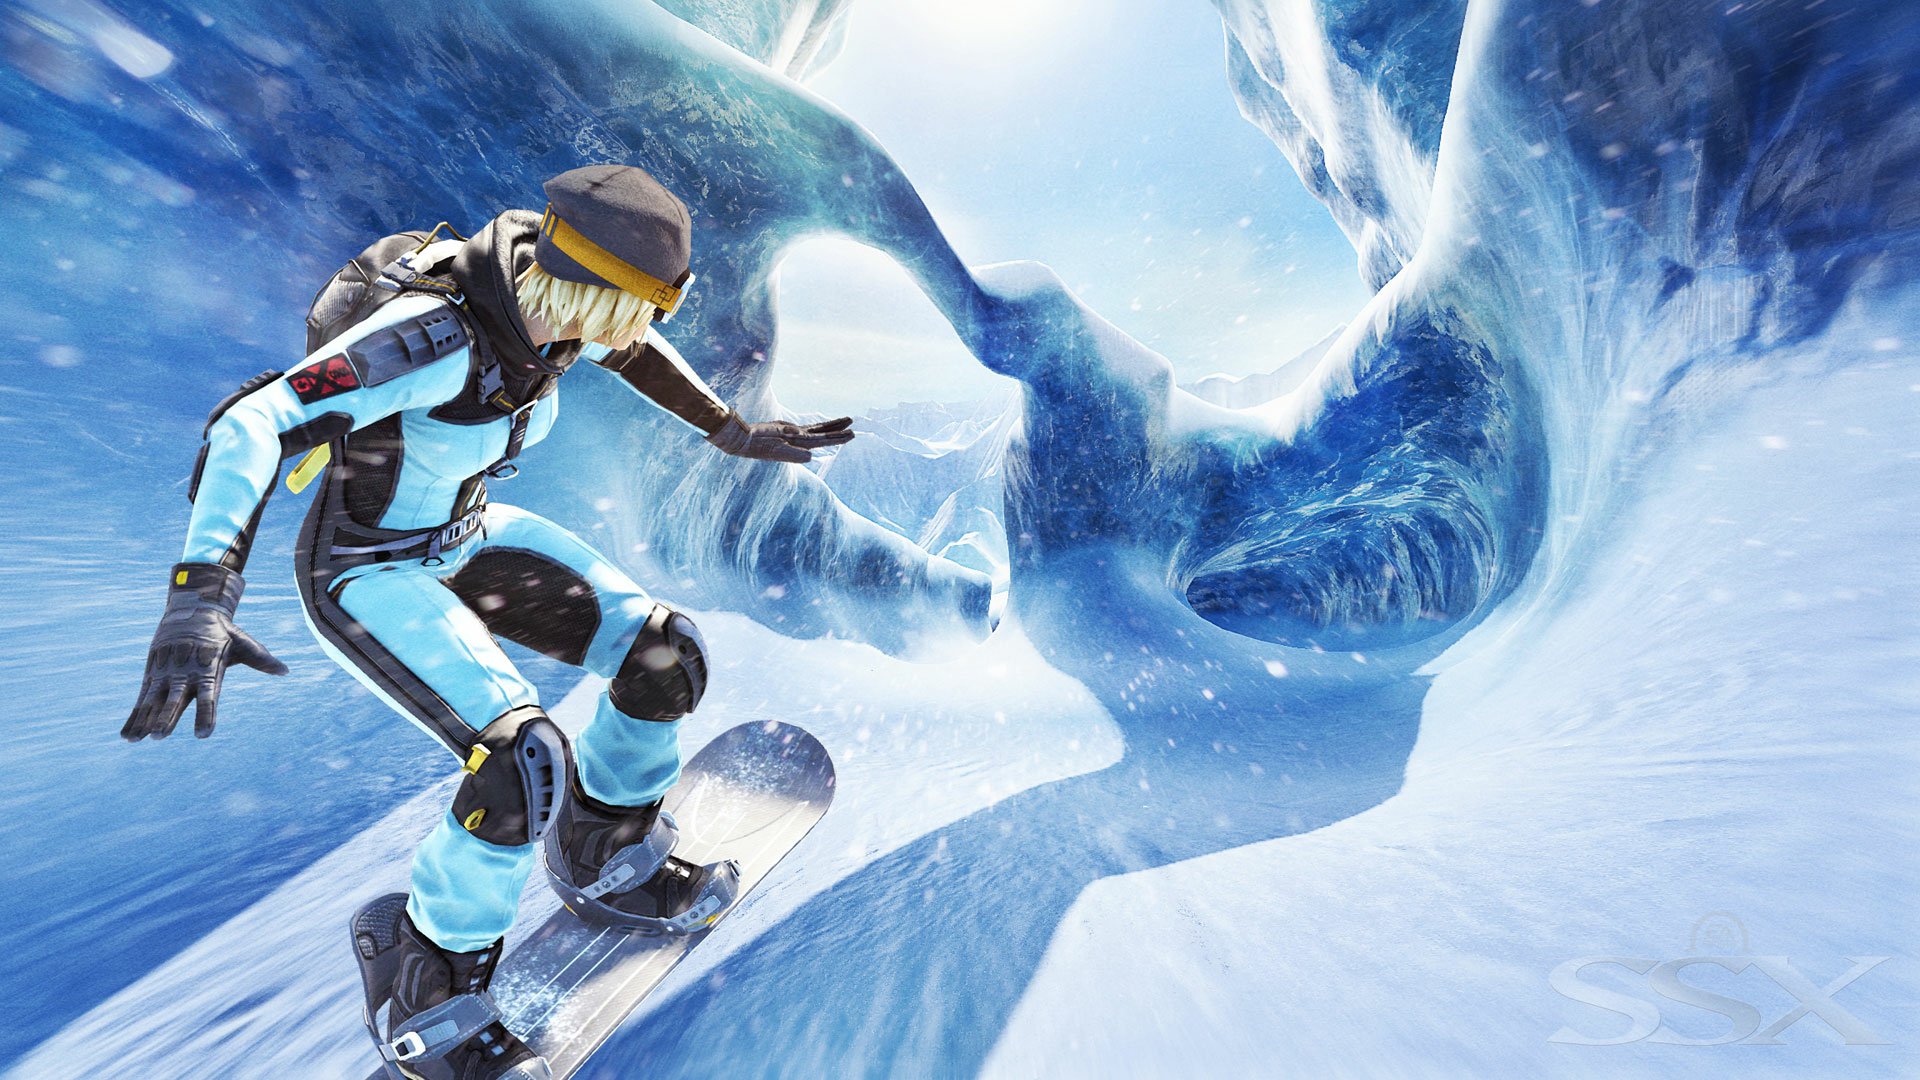 SSX 3 HD Wallpaper | Background Image | 1920x1080